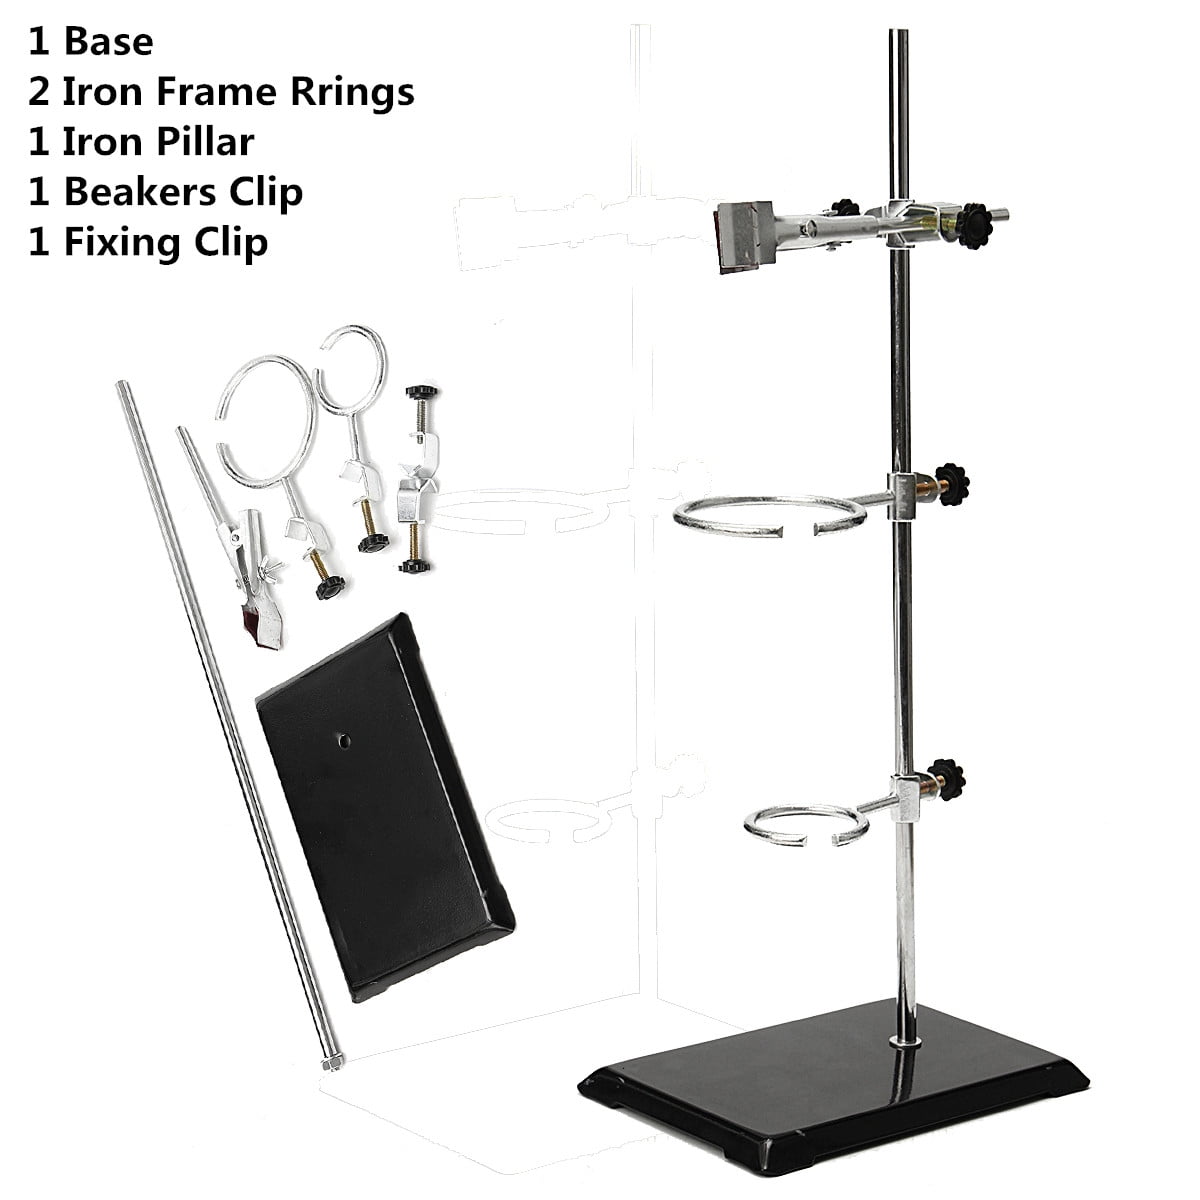 Discover 141+ ring stand and iron ring